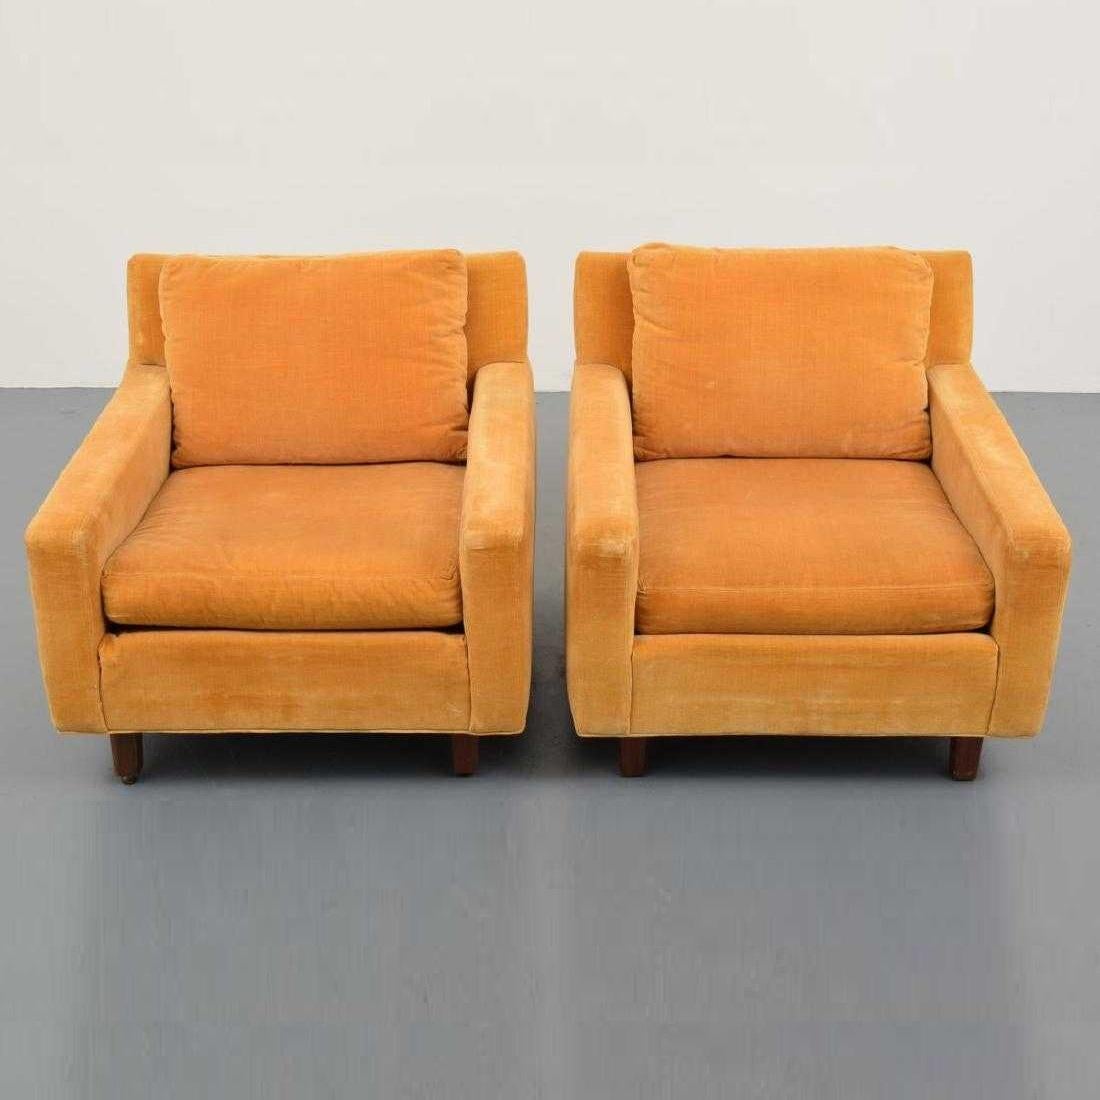 Pair of Lounge Chairs by Milo Baughman In Good Condition For Sale In Dallas, TX